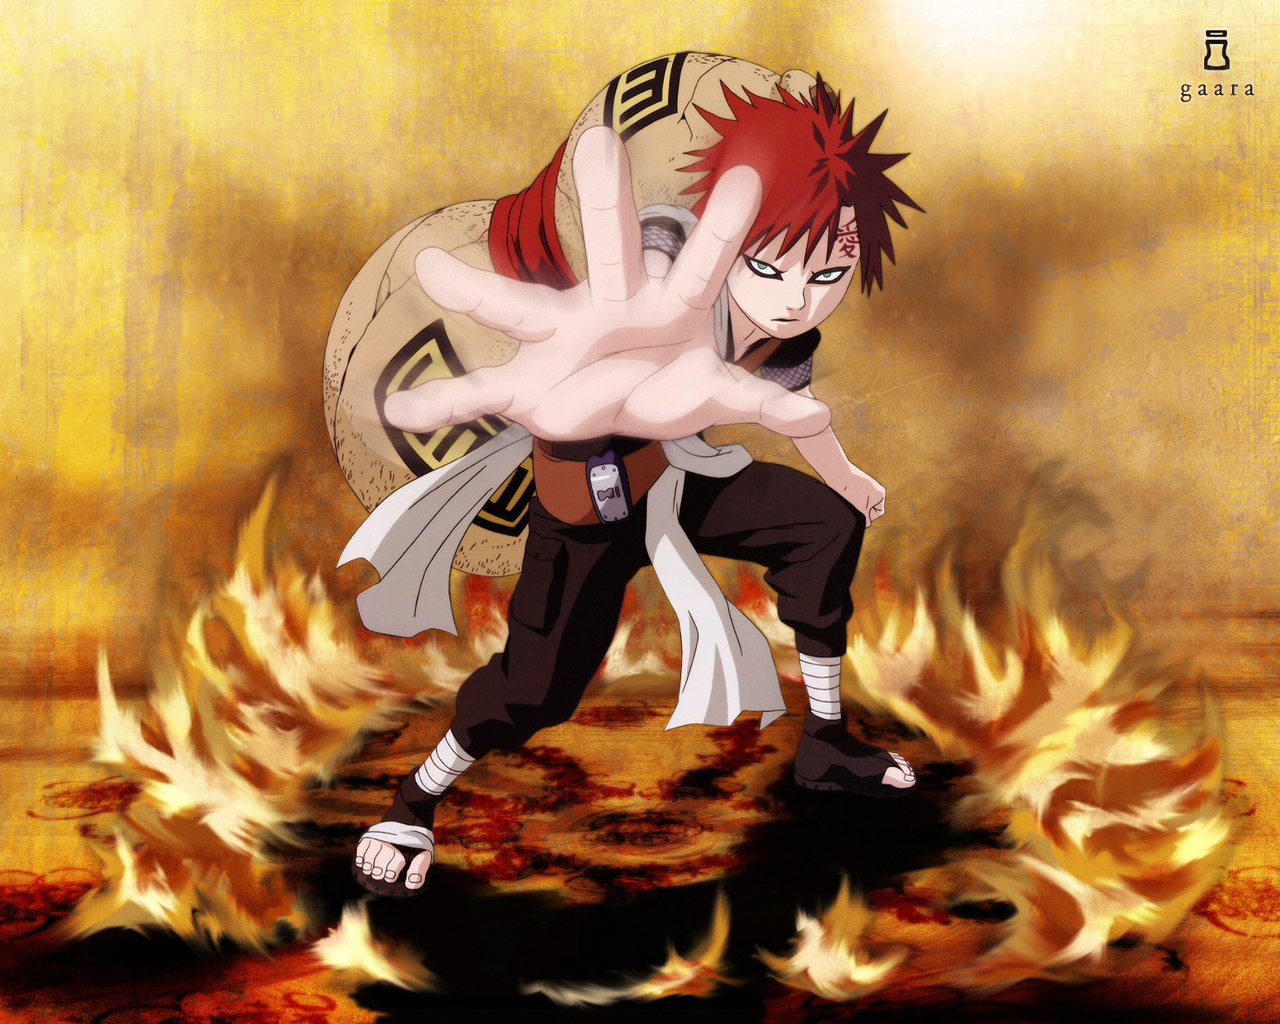 Cool Wallpaper: Gaara - Surrounded by fire